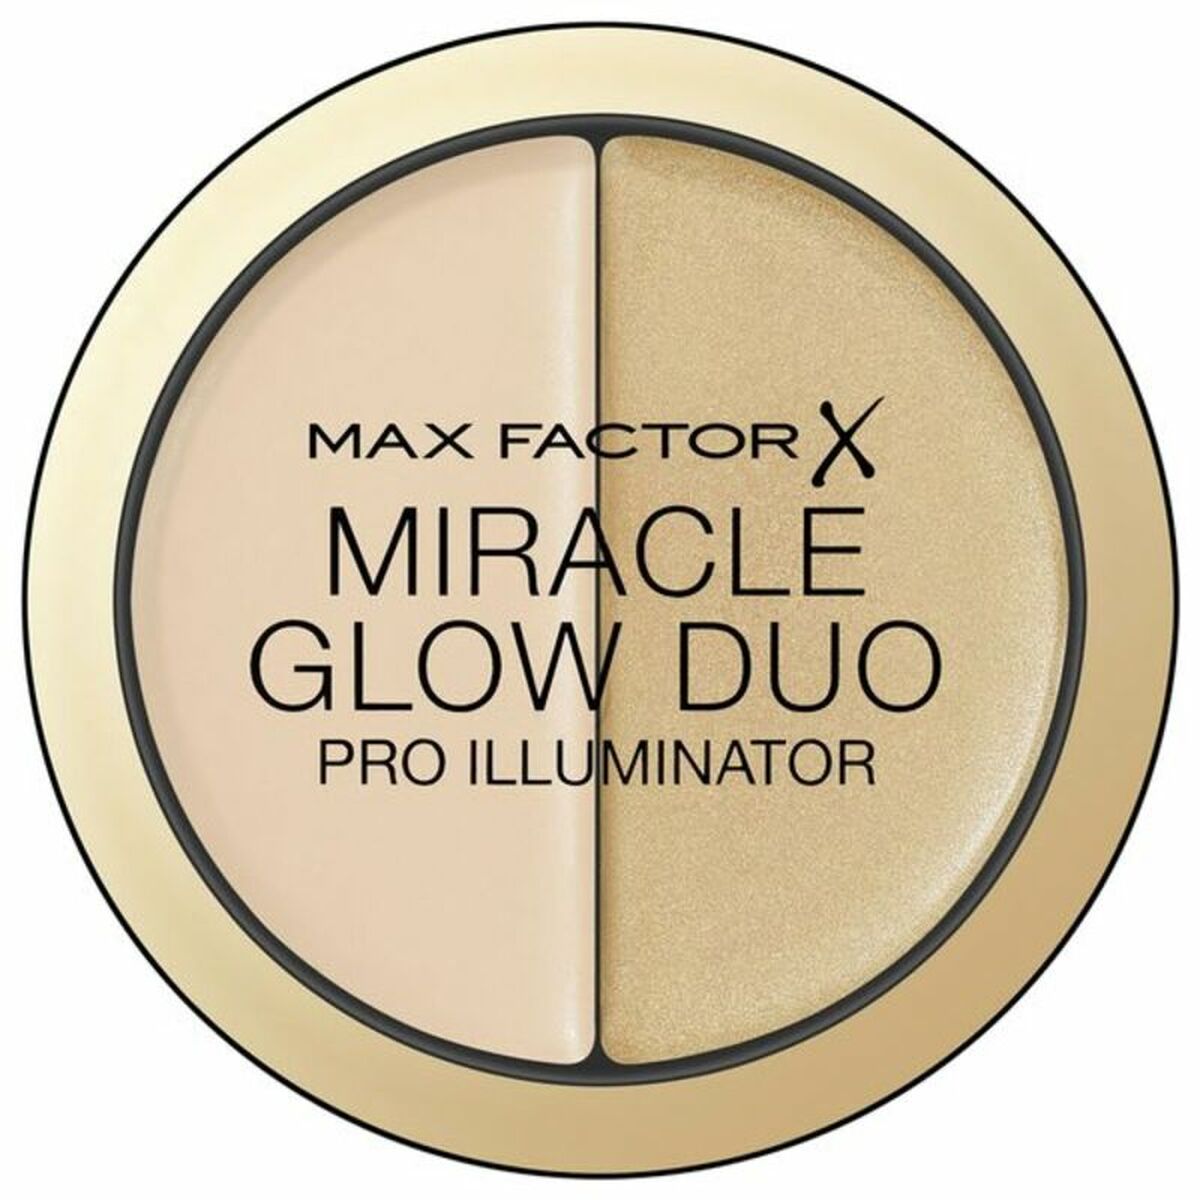 Highlighter Miracle Glow Duo Max Factor - JOSEPH BEAUTY